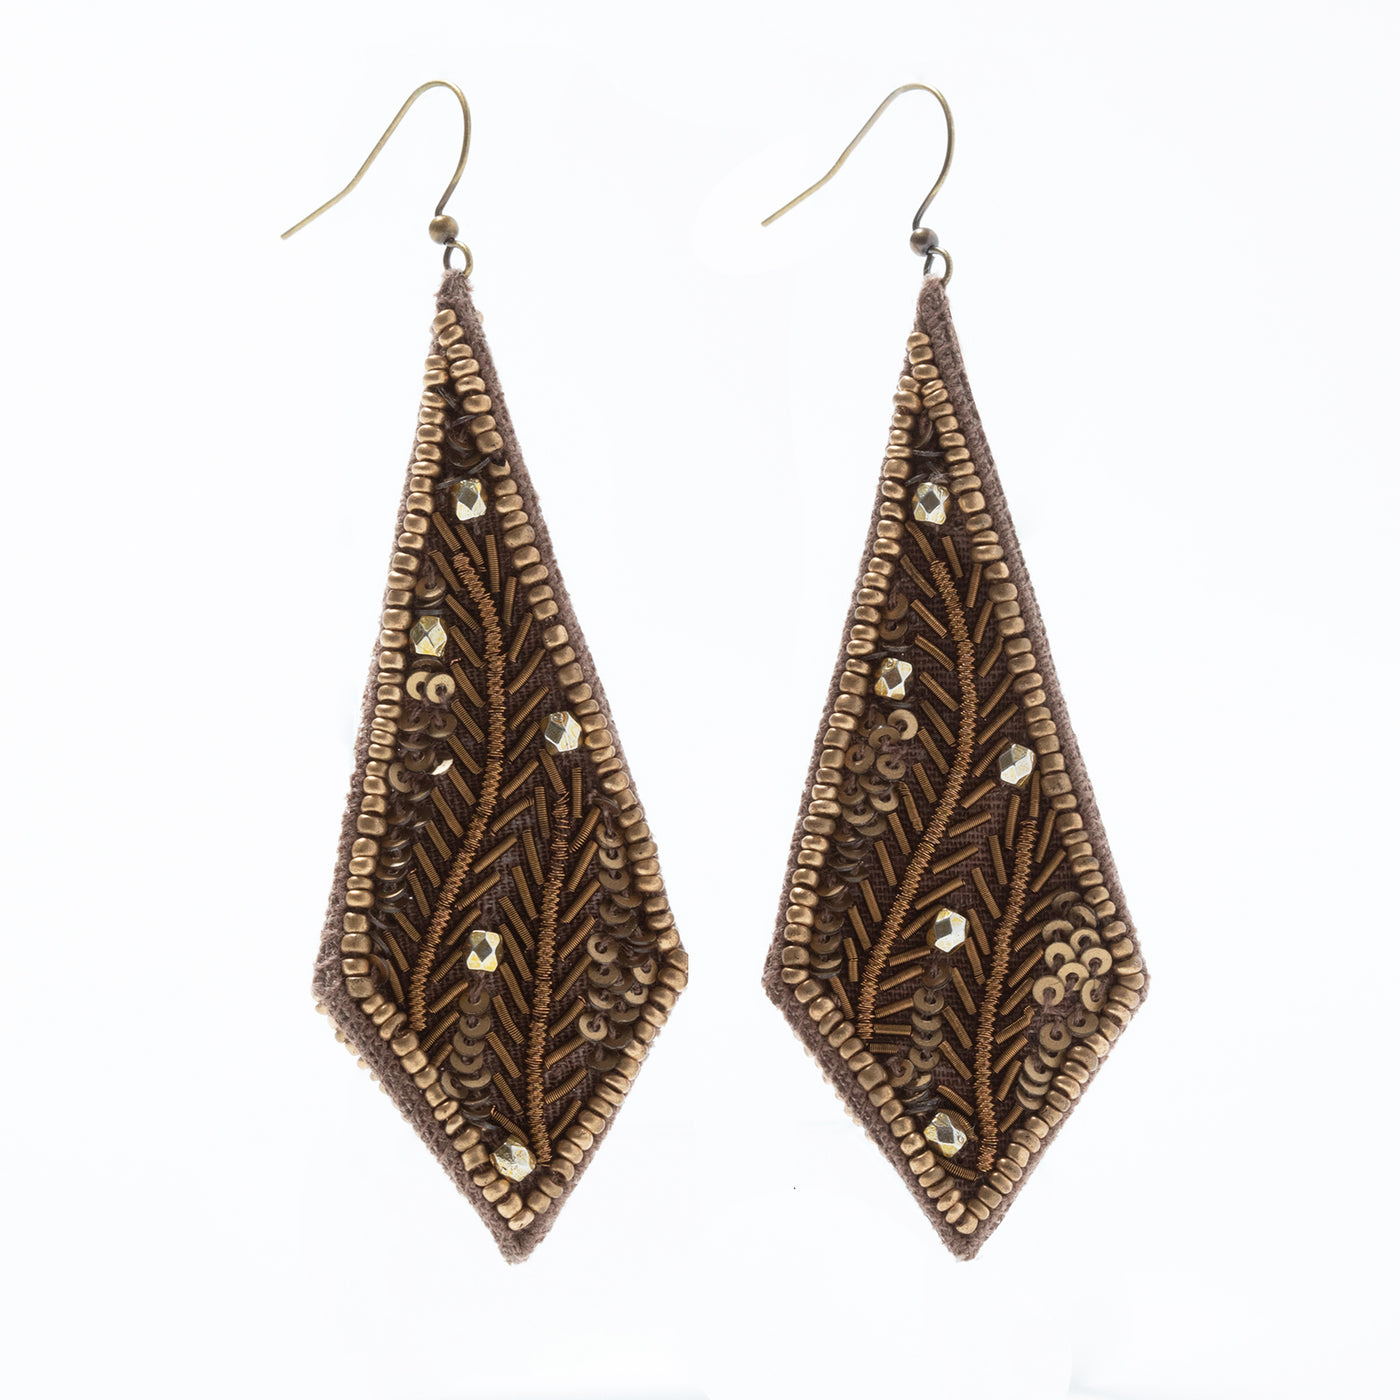 Lori Weitzner Padma embroidered drop earrings in copper